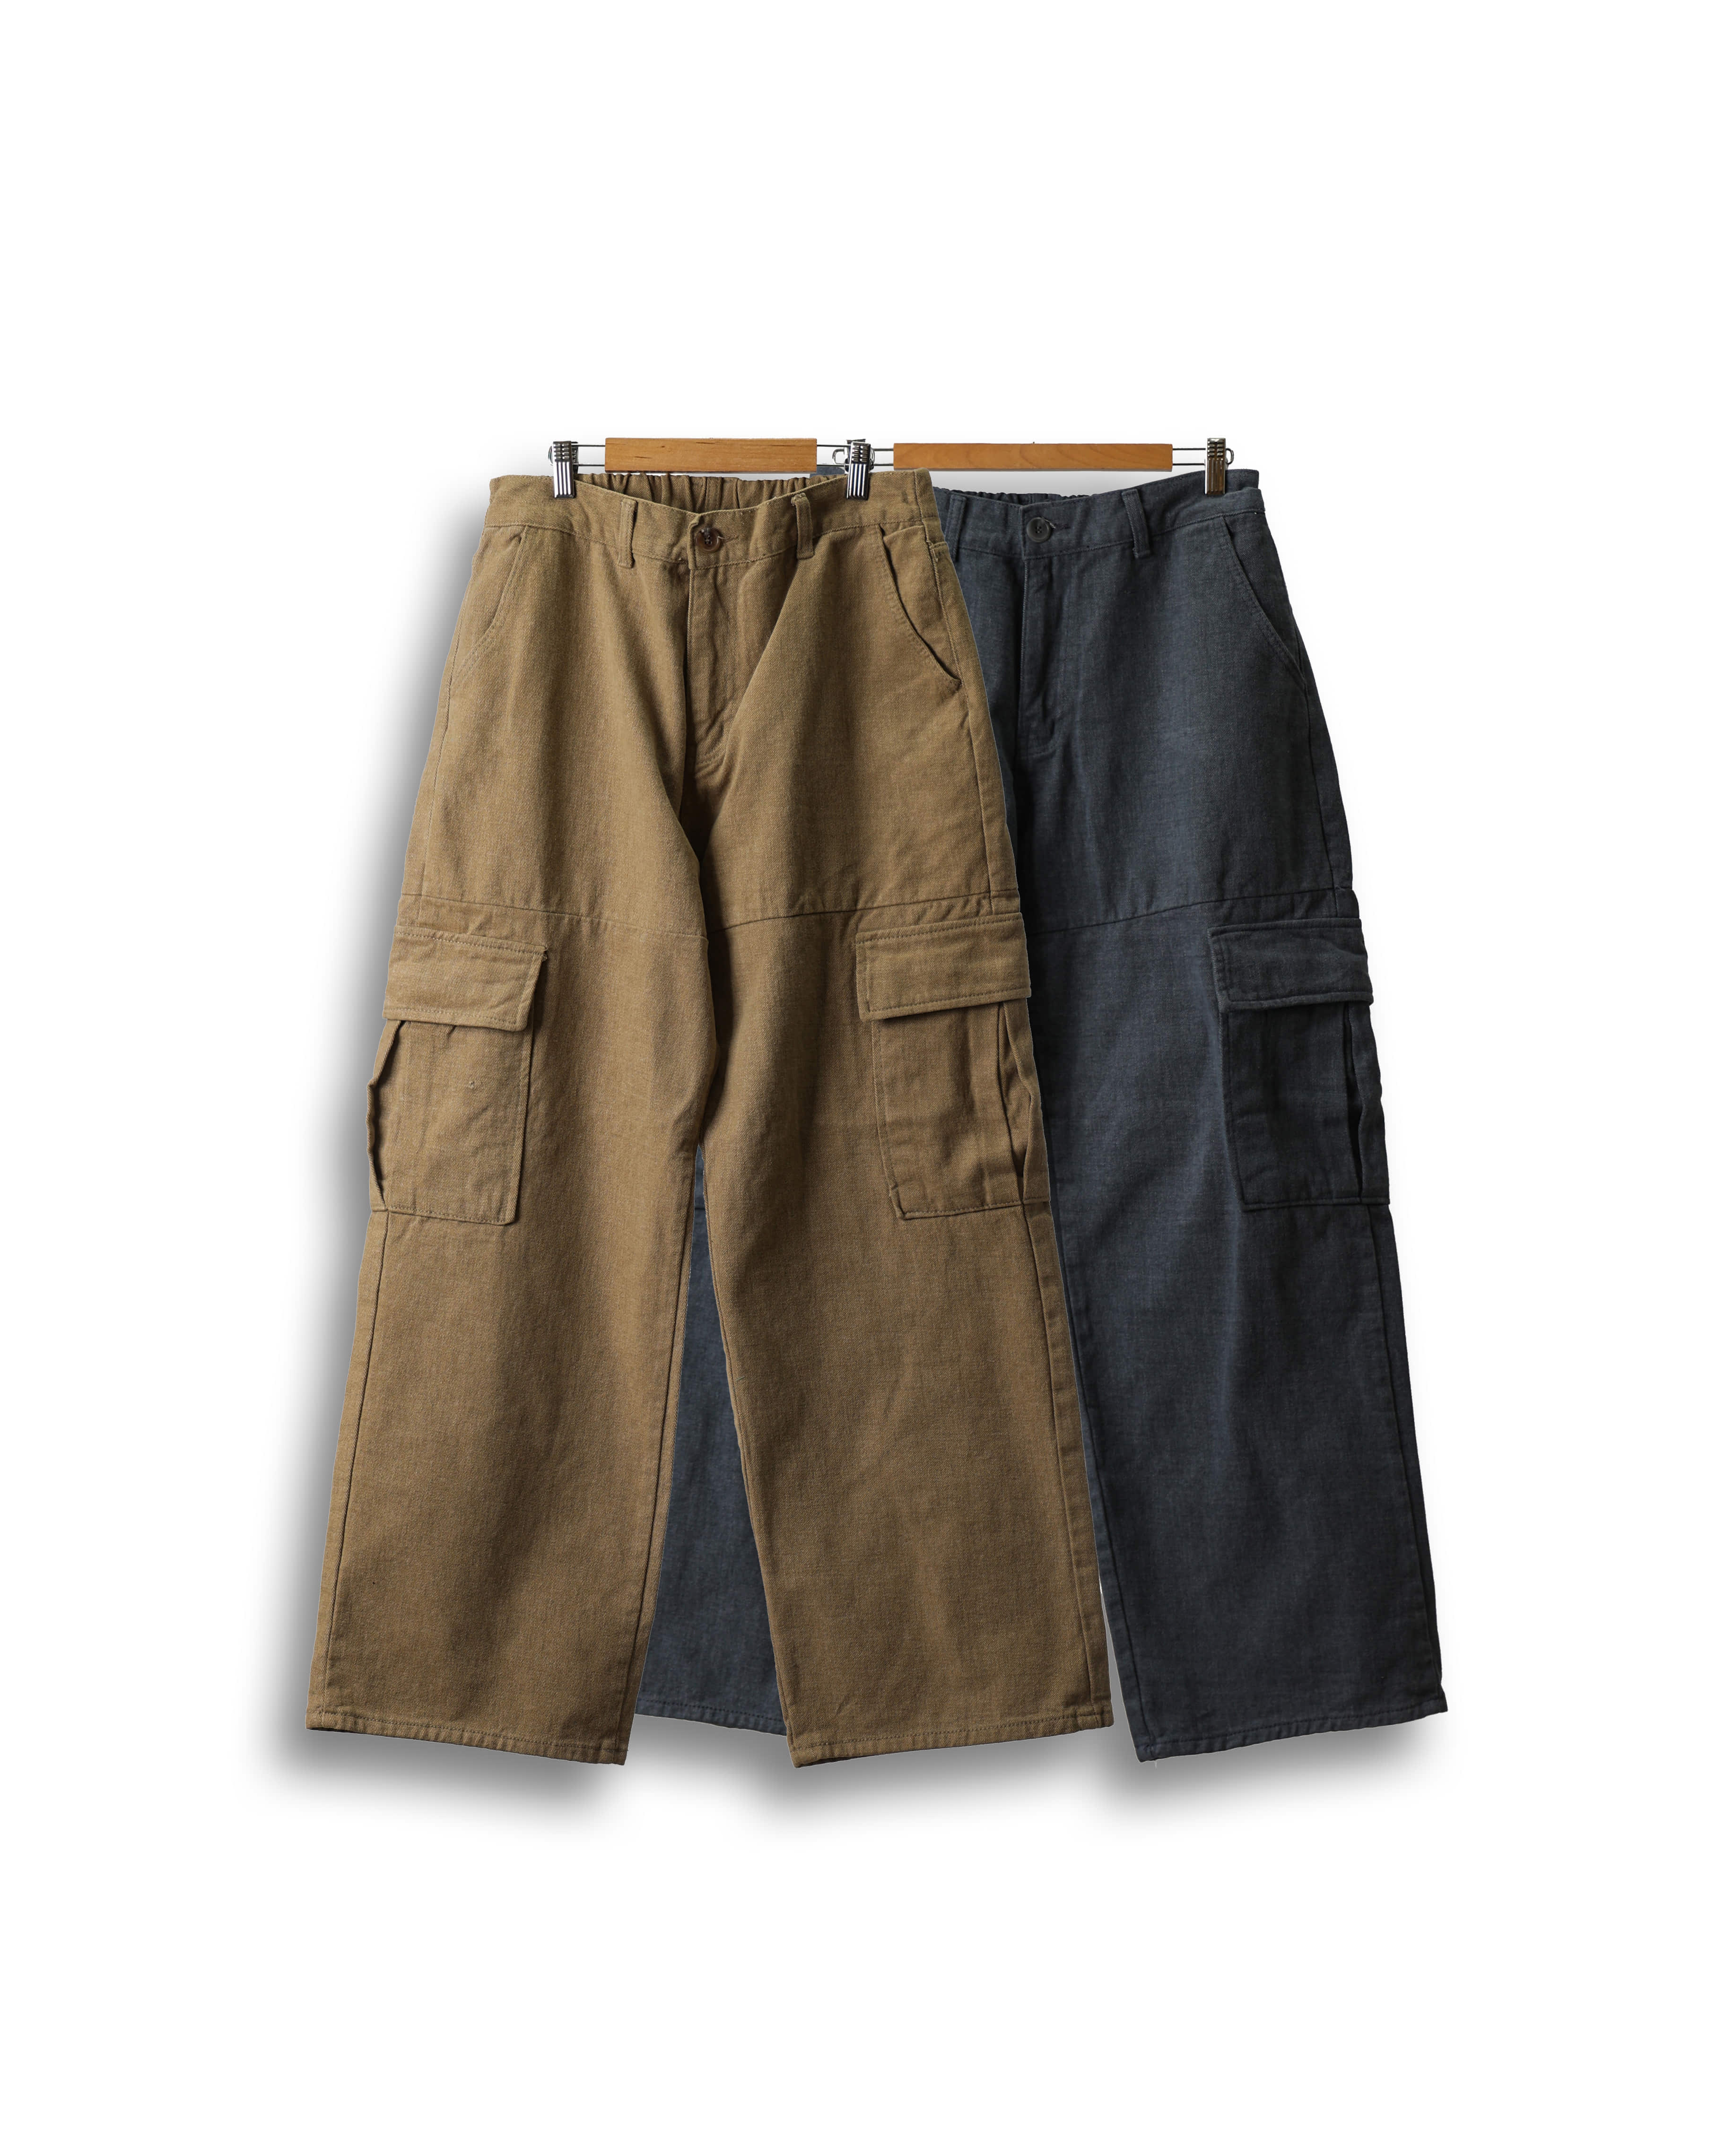 CLV 505 Peach Brushed Cargo Pants (Blue Gray/Beige)